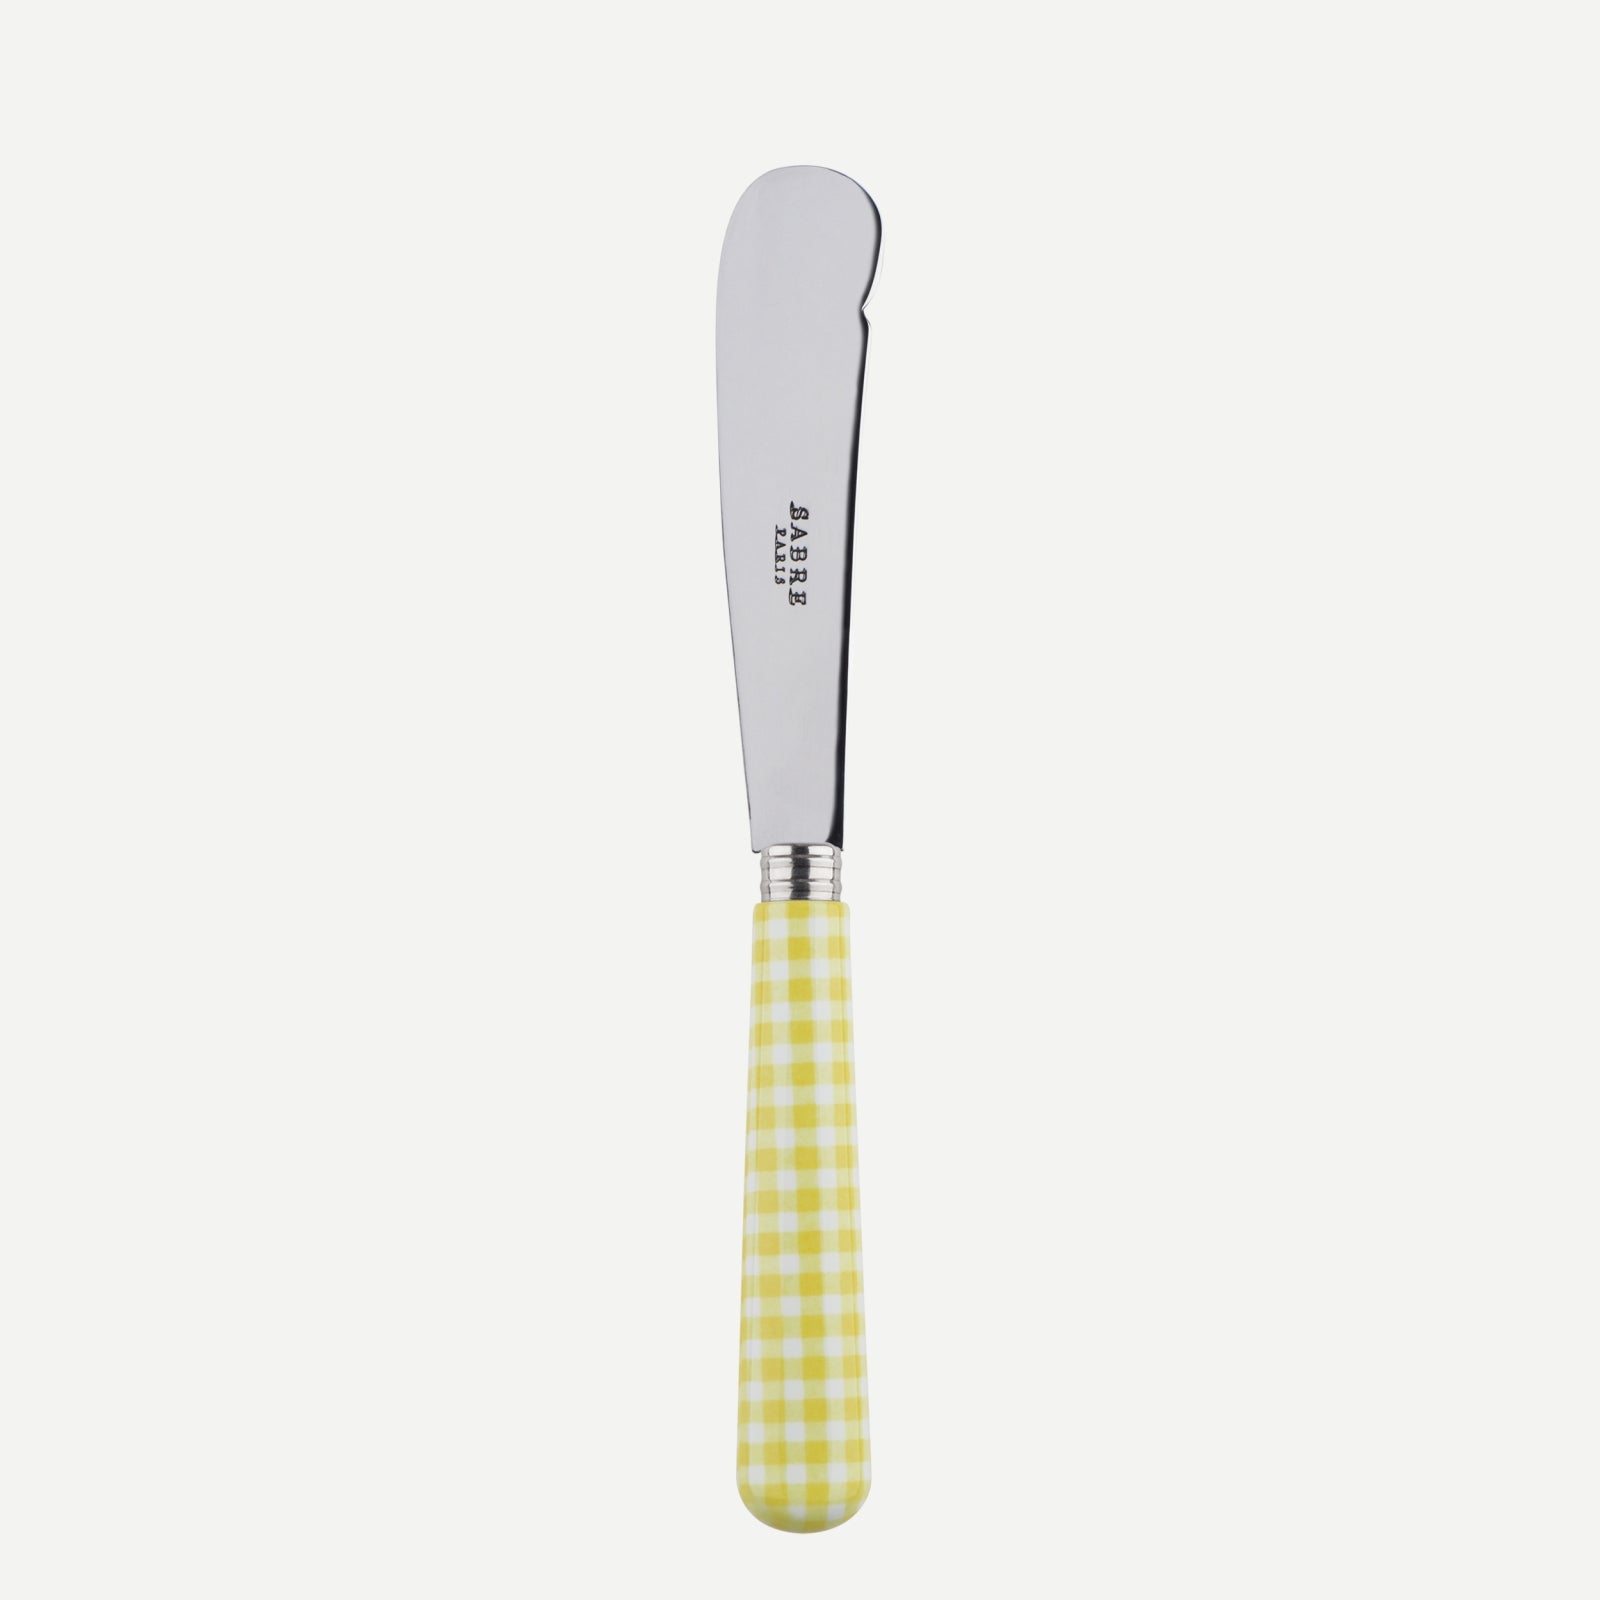 Butter knife - Gingham - Yellow